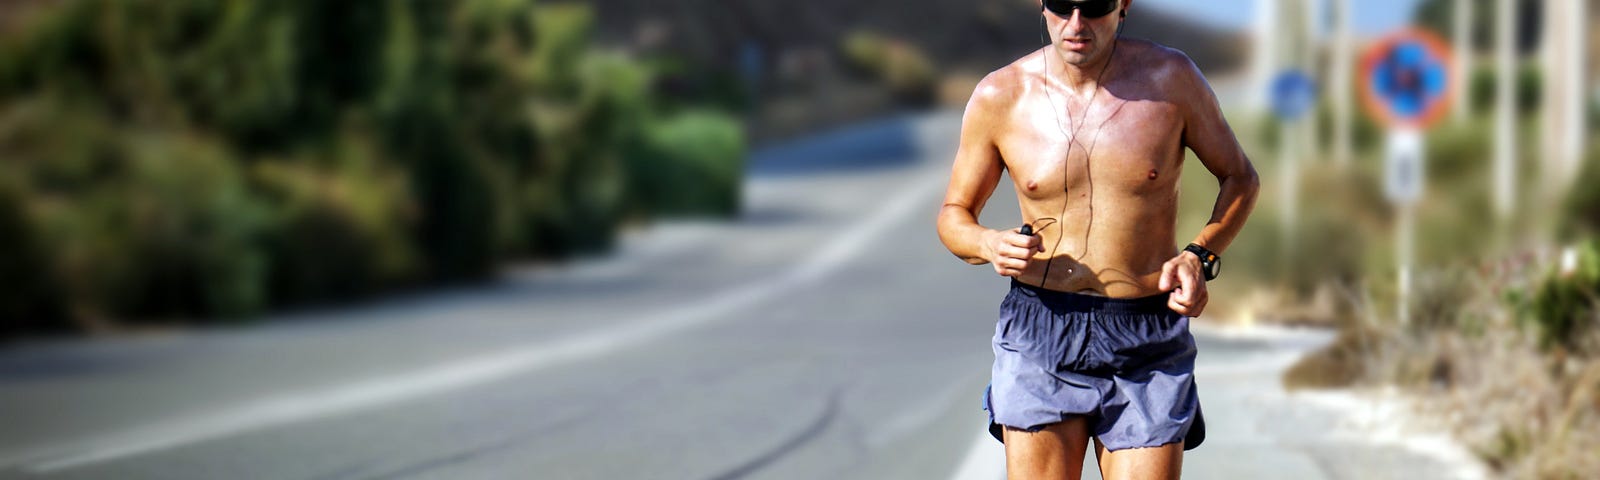 Male runner, topless, on a quiet country road.